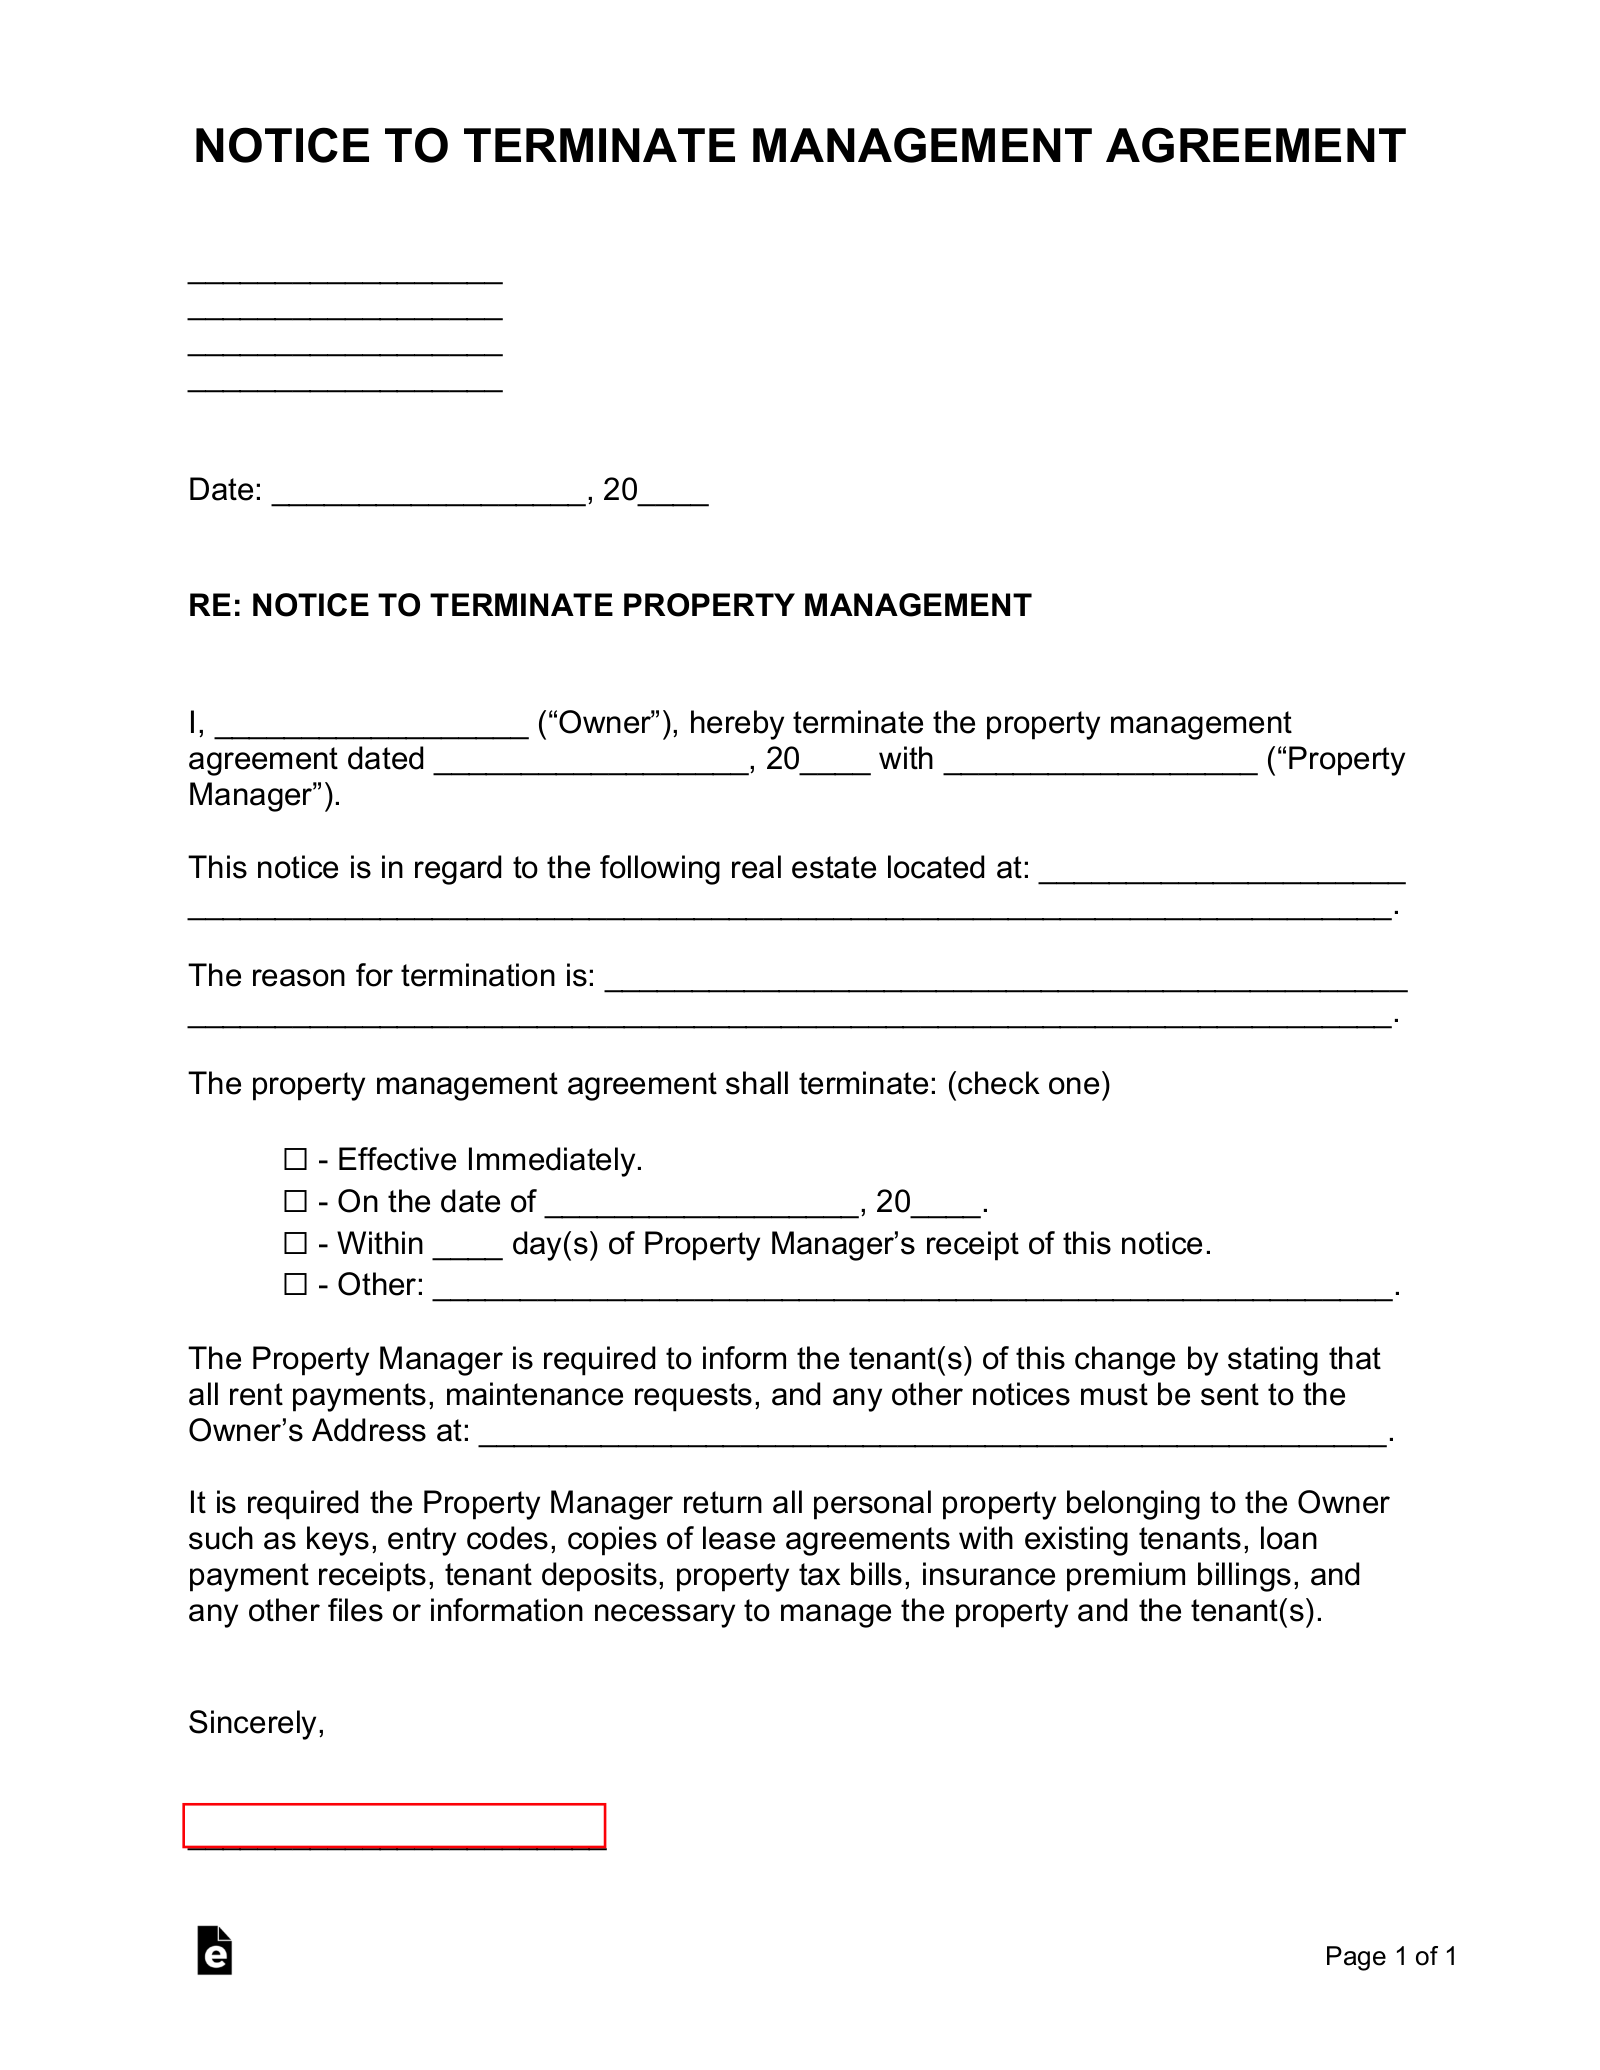 Terminate Property Management Agreement Letter from eforms.com